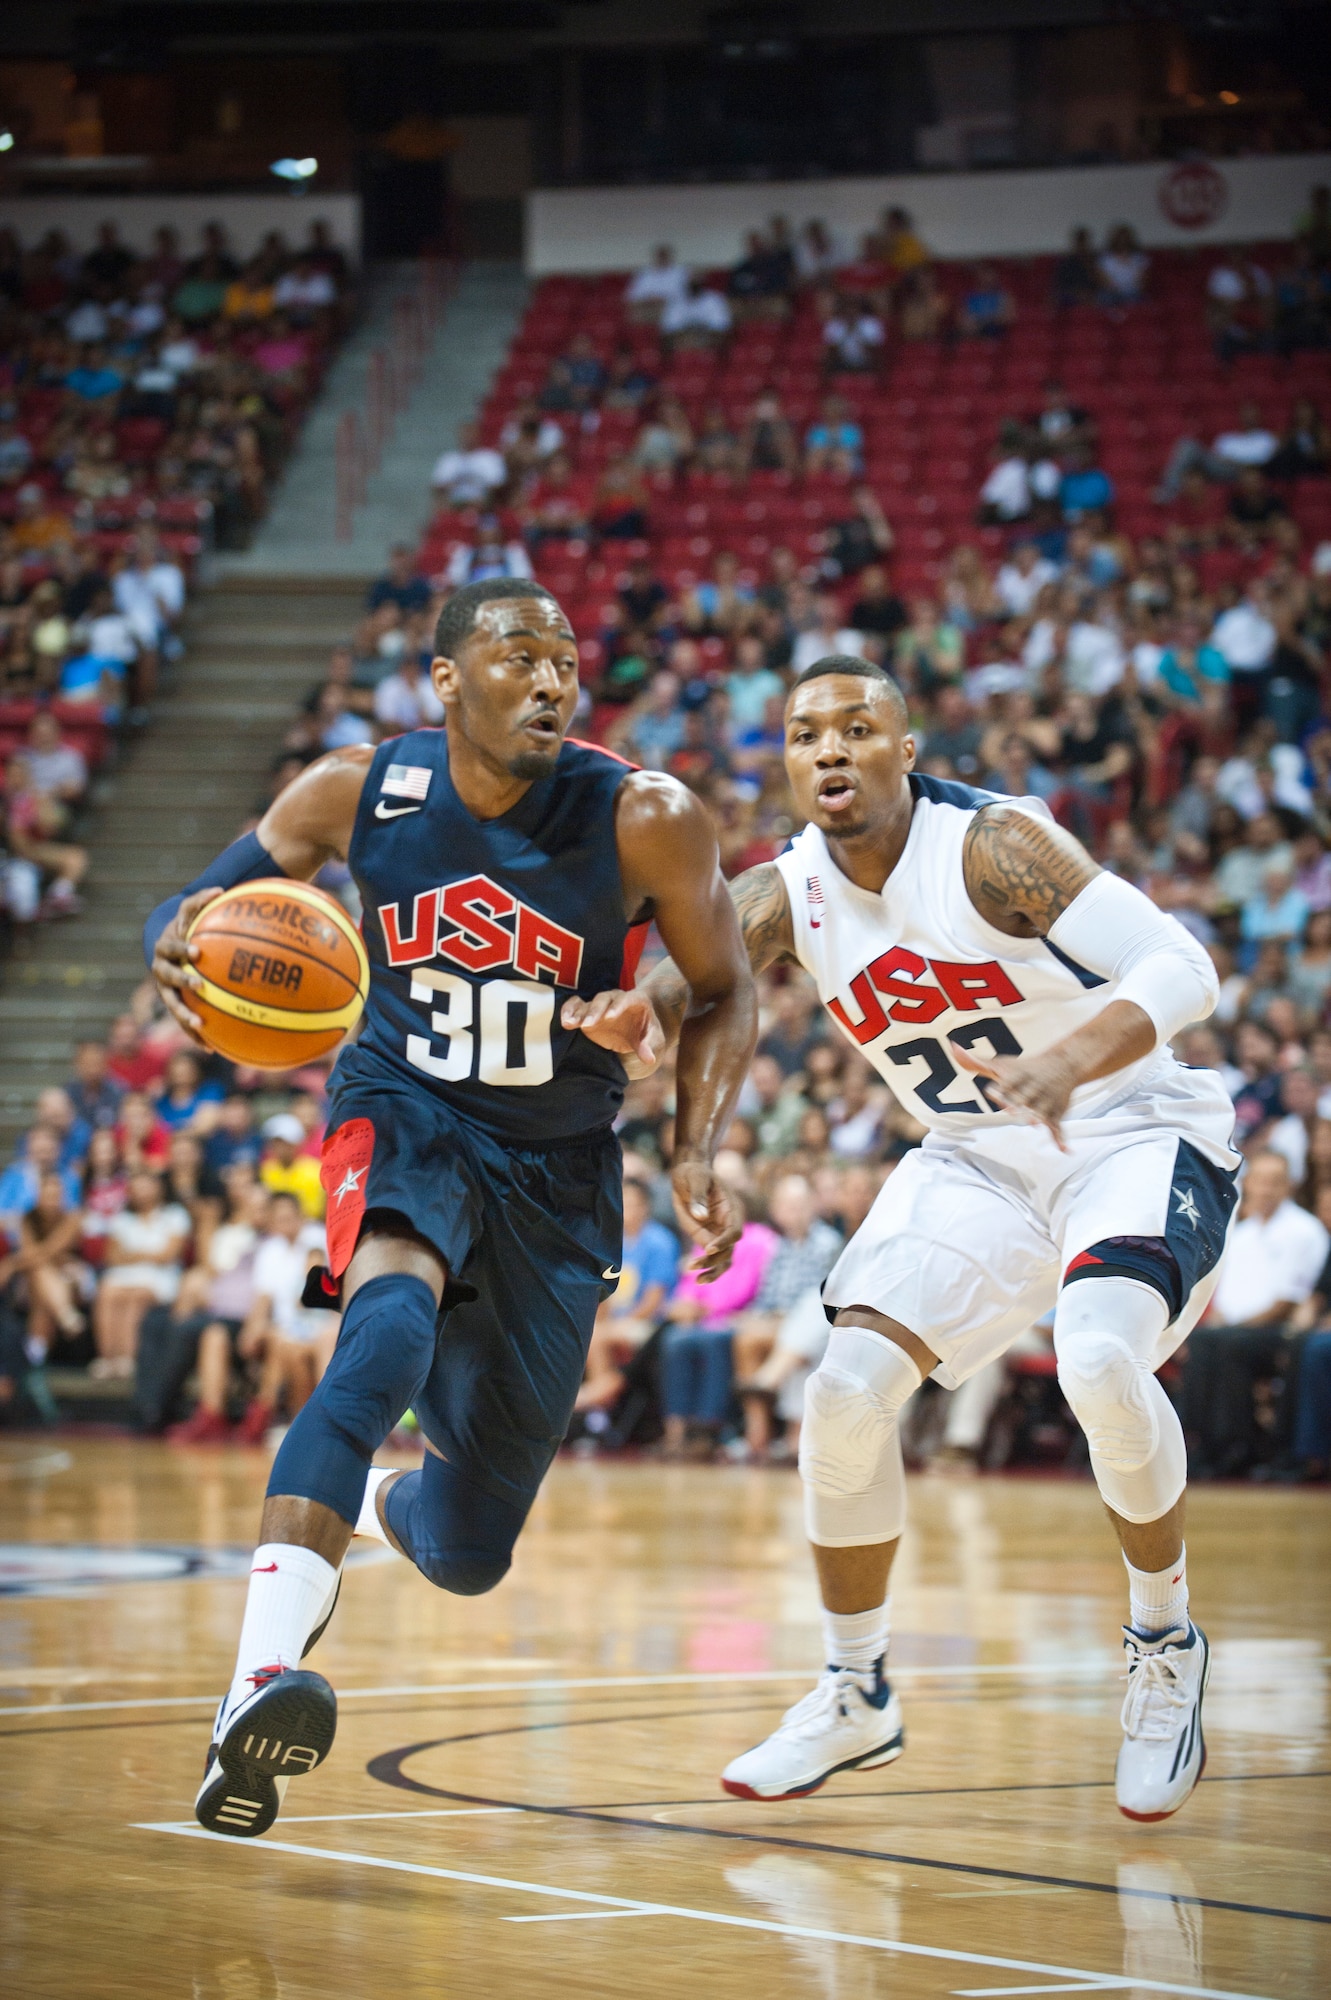 USA Basketball Men’s National Team guard John Wall (No. 30), drives past fellow guard and teammate Damian Lillard (No. 22), during an intra-squad scrimmage at the Thomas and Mack Center in Las Vegas, August 1, 2014. Wall and Lillard also play for the Washington Wizards and the Portland Trailblazers, respectively, in the National Basketball Association. (U.S. Air Force photo by Airman 1st Class Thomas Spangler) 